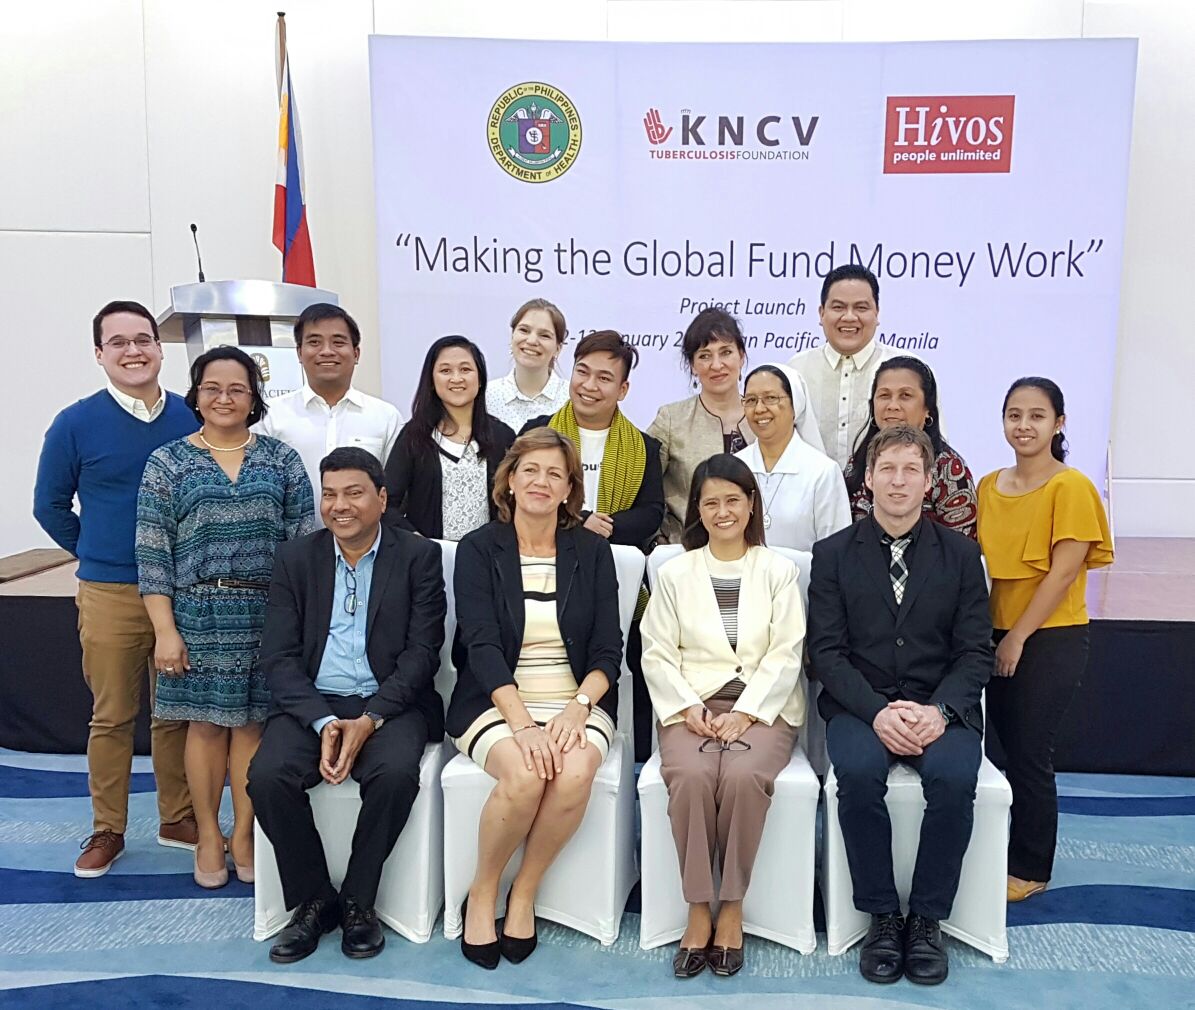 Building strong partnerships to stop TB-HIV in the Philippines